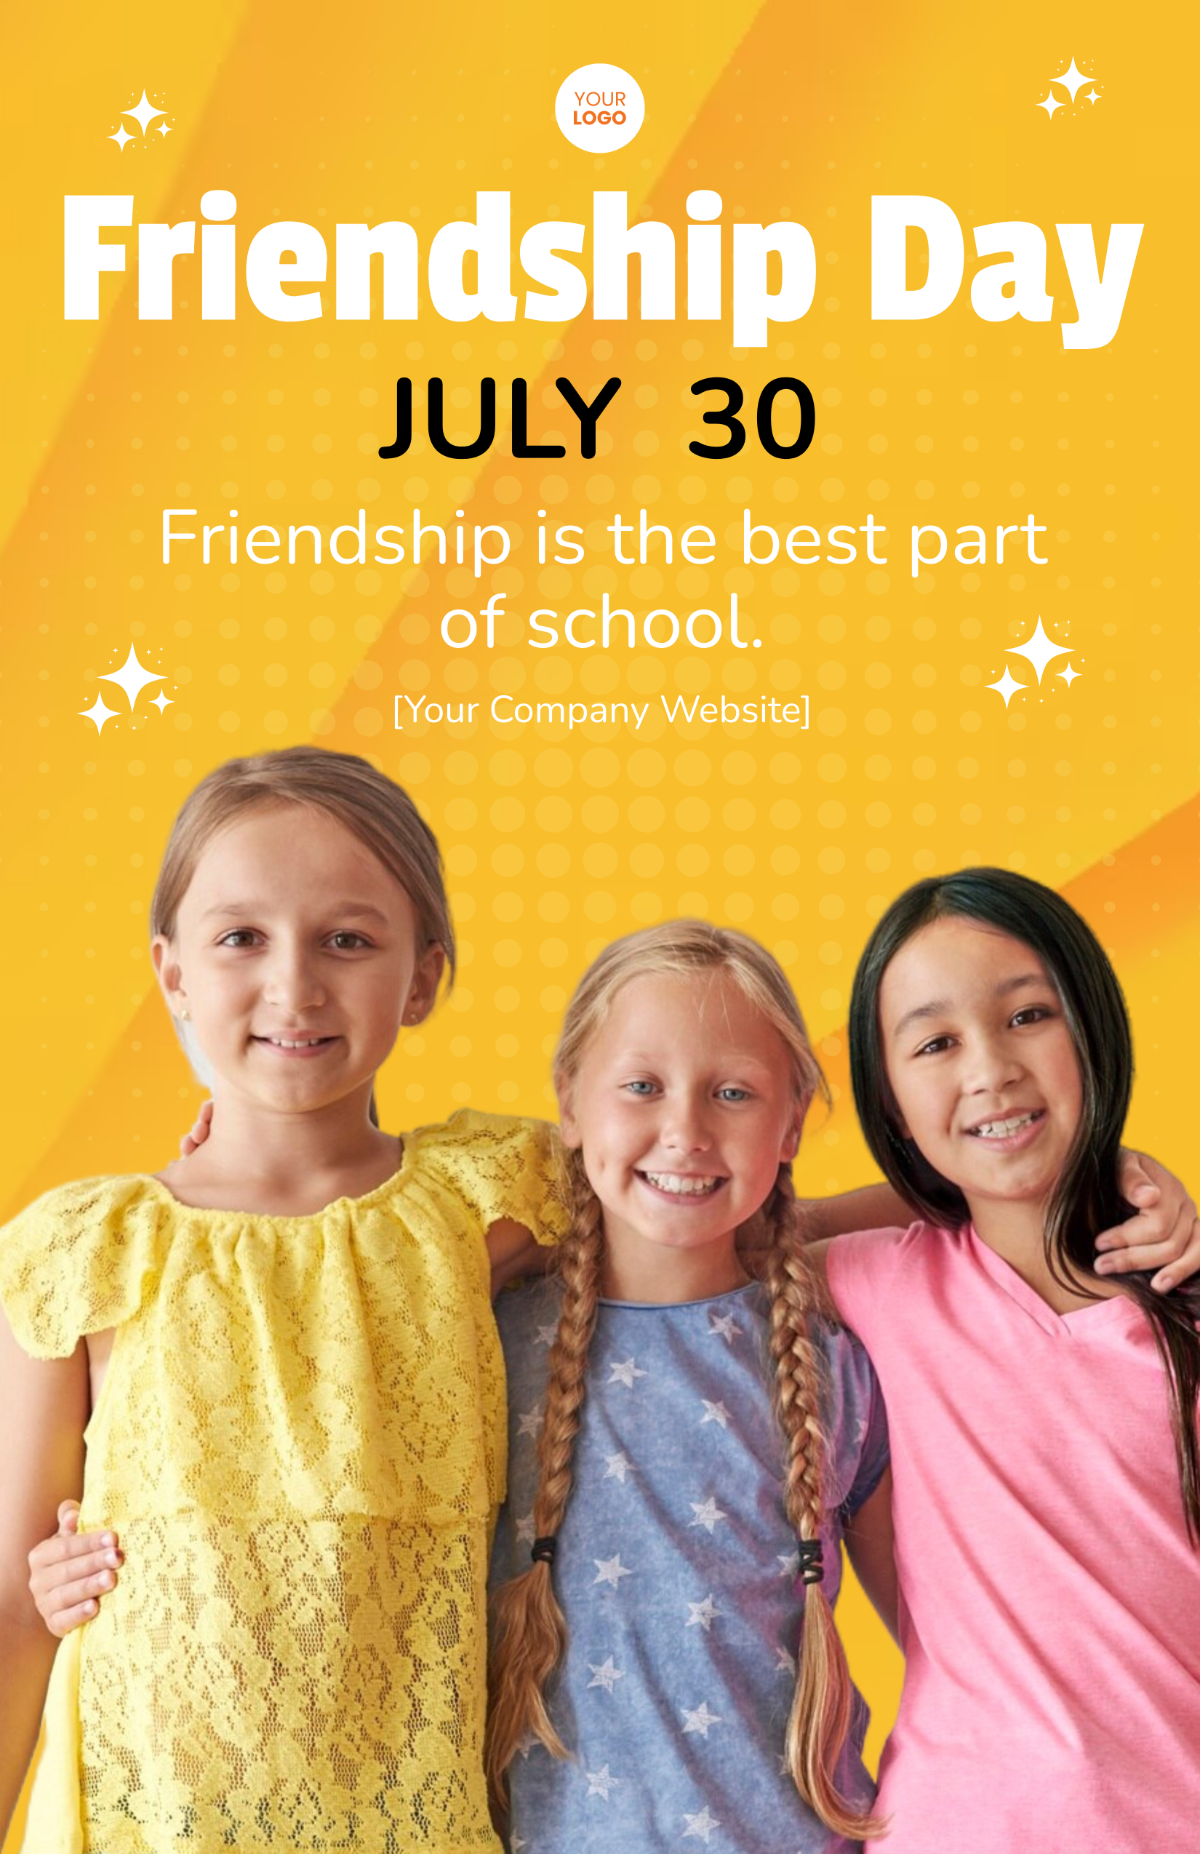 Friendship Day Poster for School